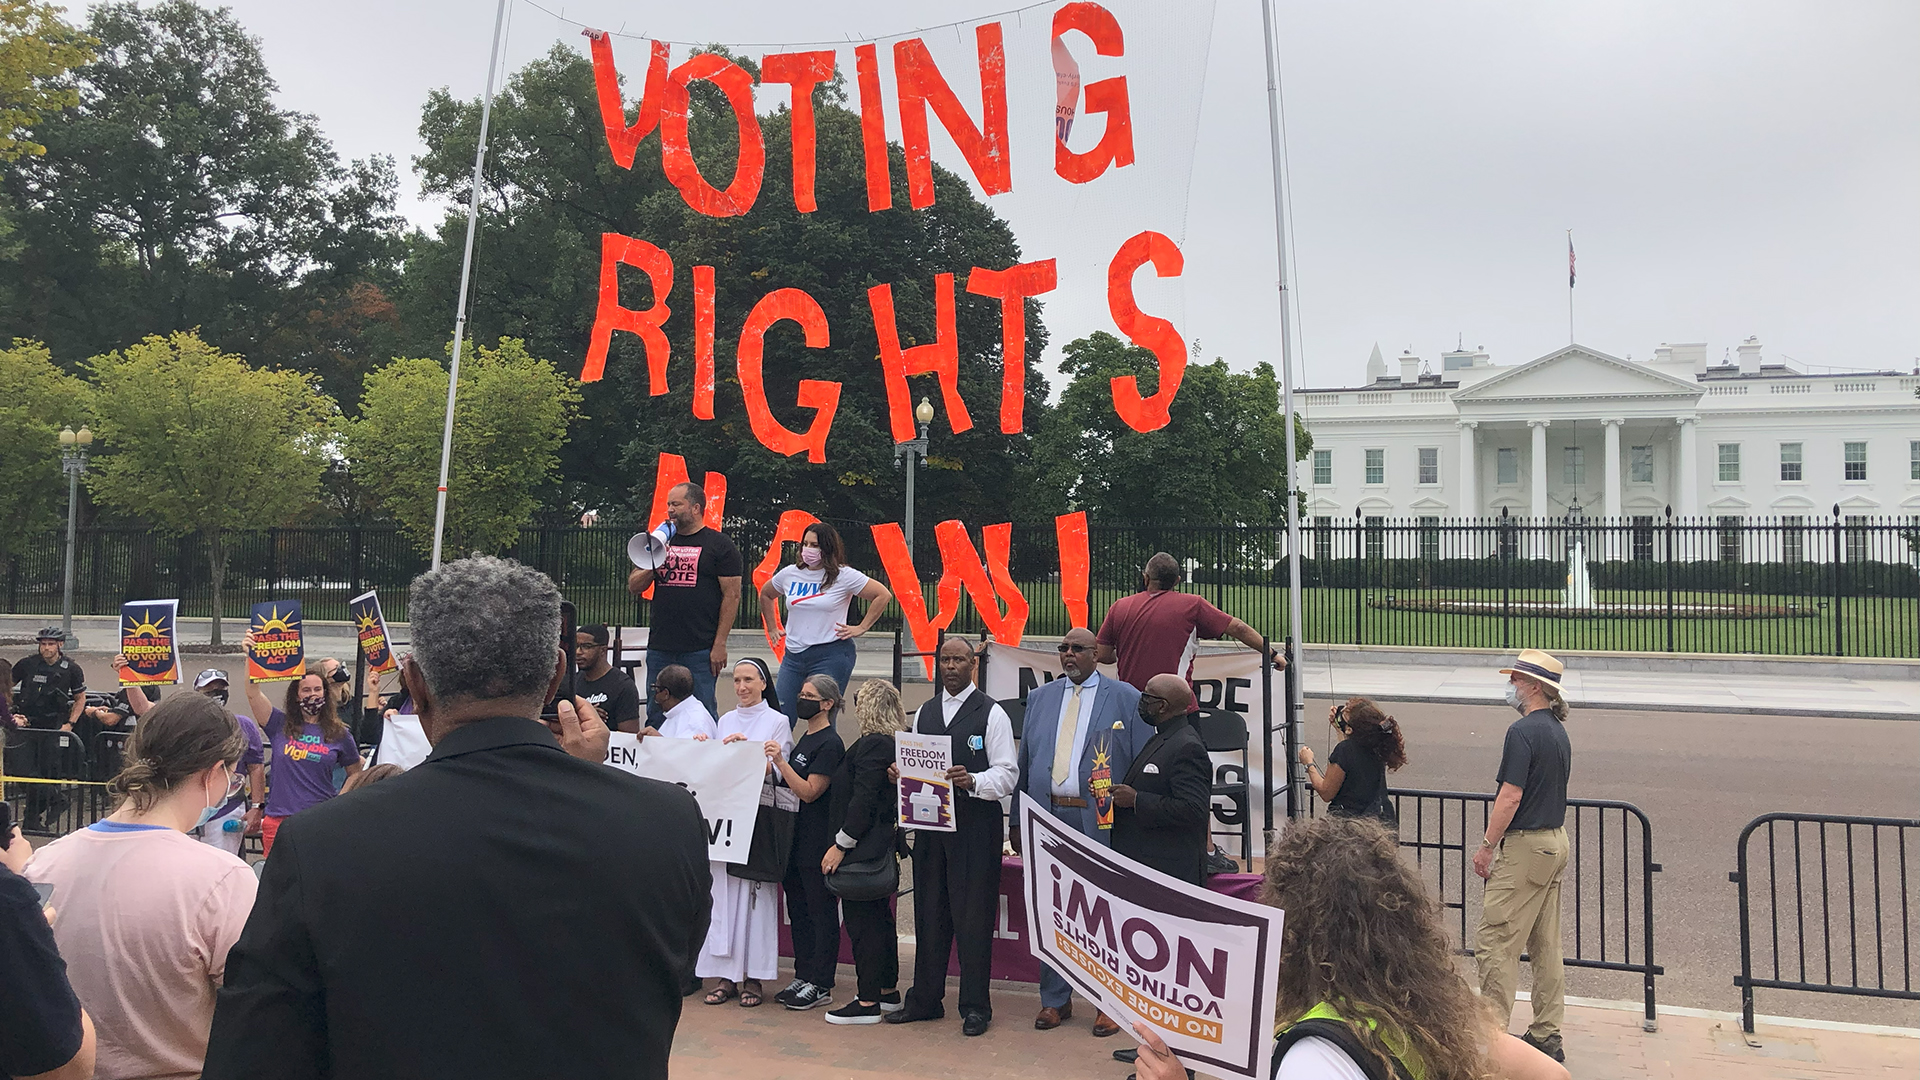 Voting Rights Now